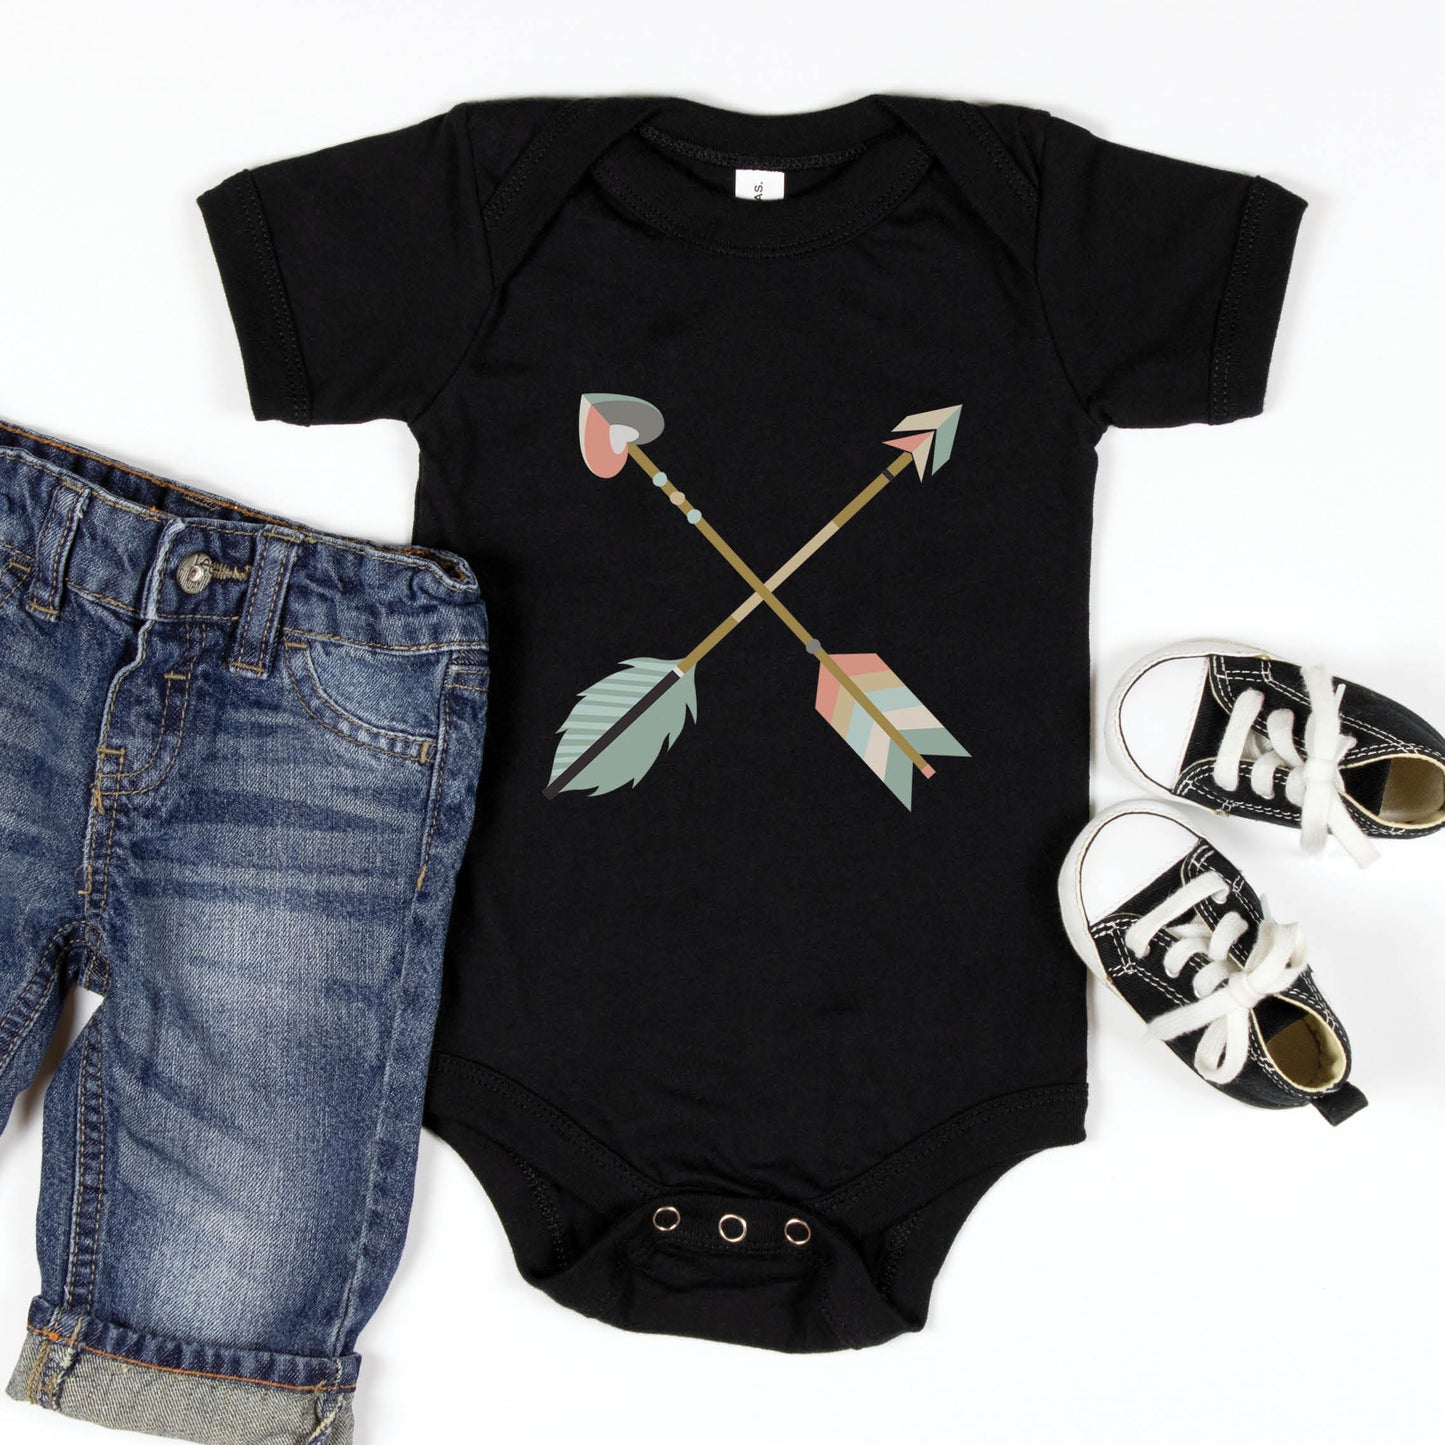 Cute criss cross boho arrows black neutral baby onesie bodysuit for boys and girls, matching mommy-and-me Christian Raising Arrows Psalm 127:4-5 scripture faith-based Mom T-Shirt